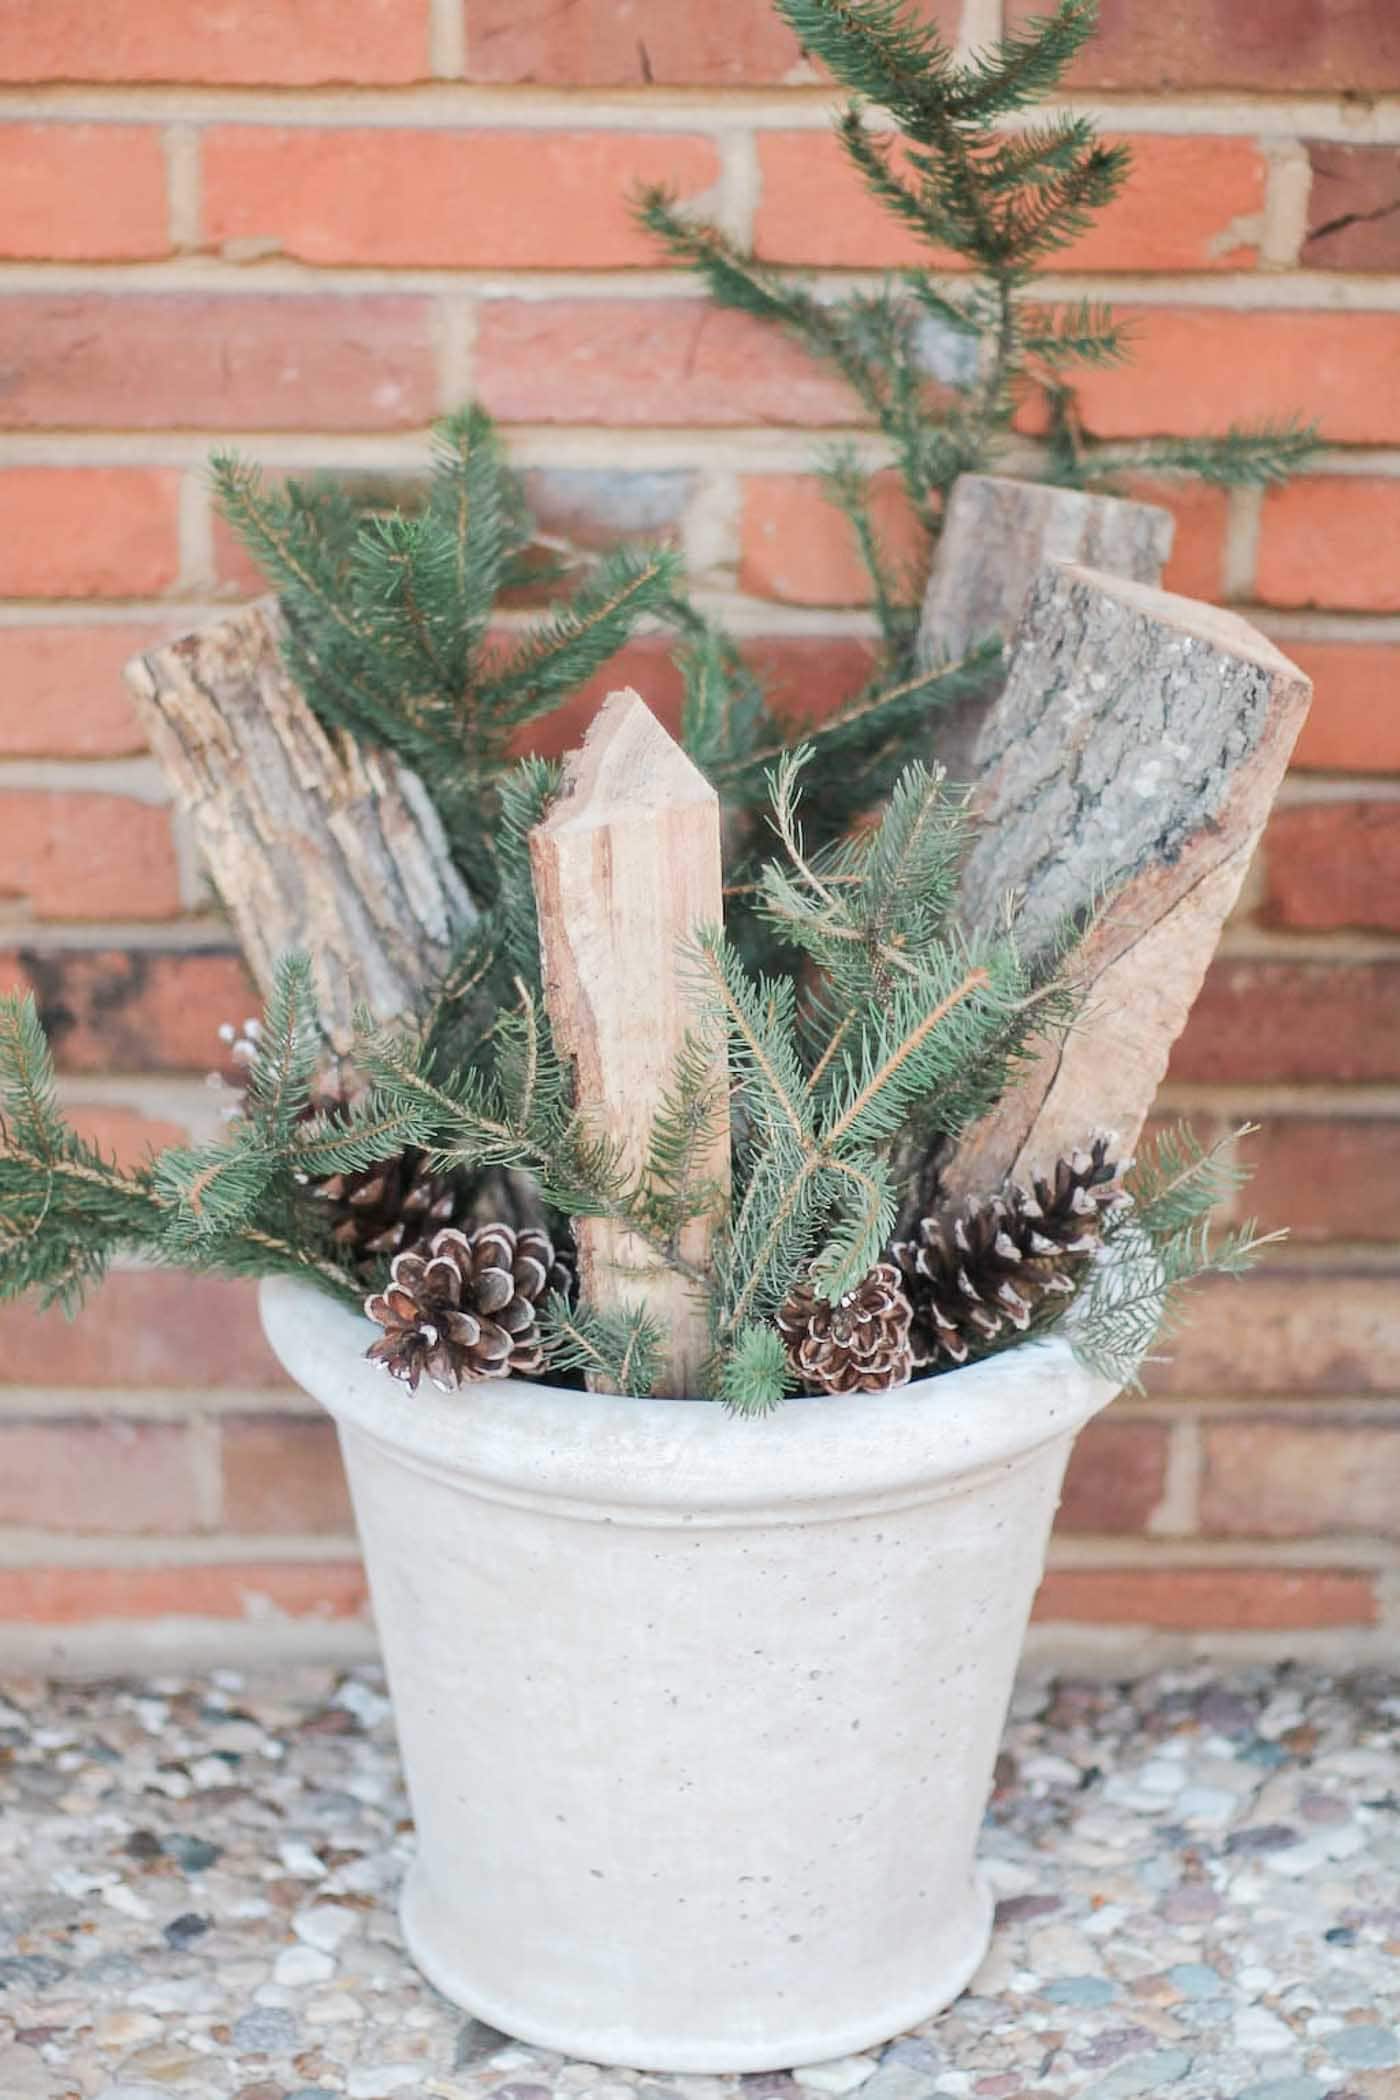 Foraged topiary, a budget friendly fall decorating idea